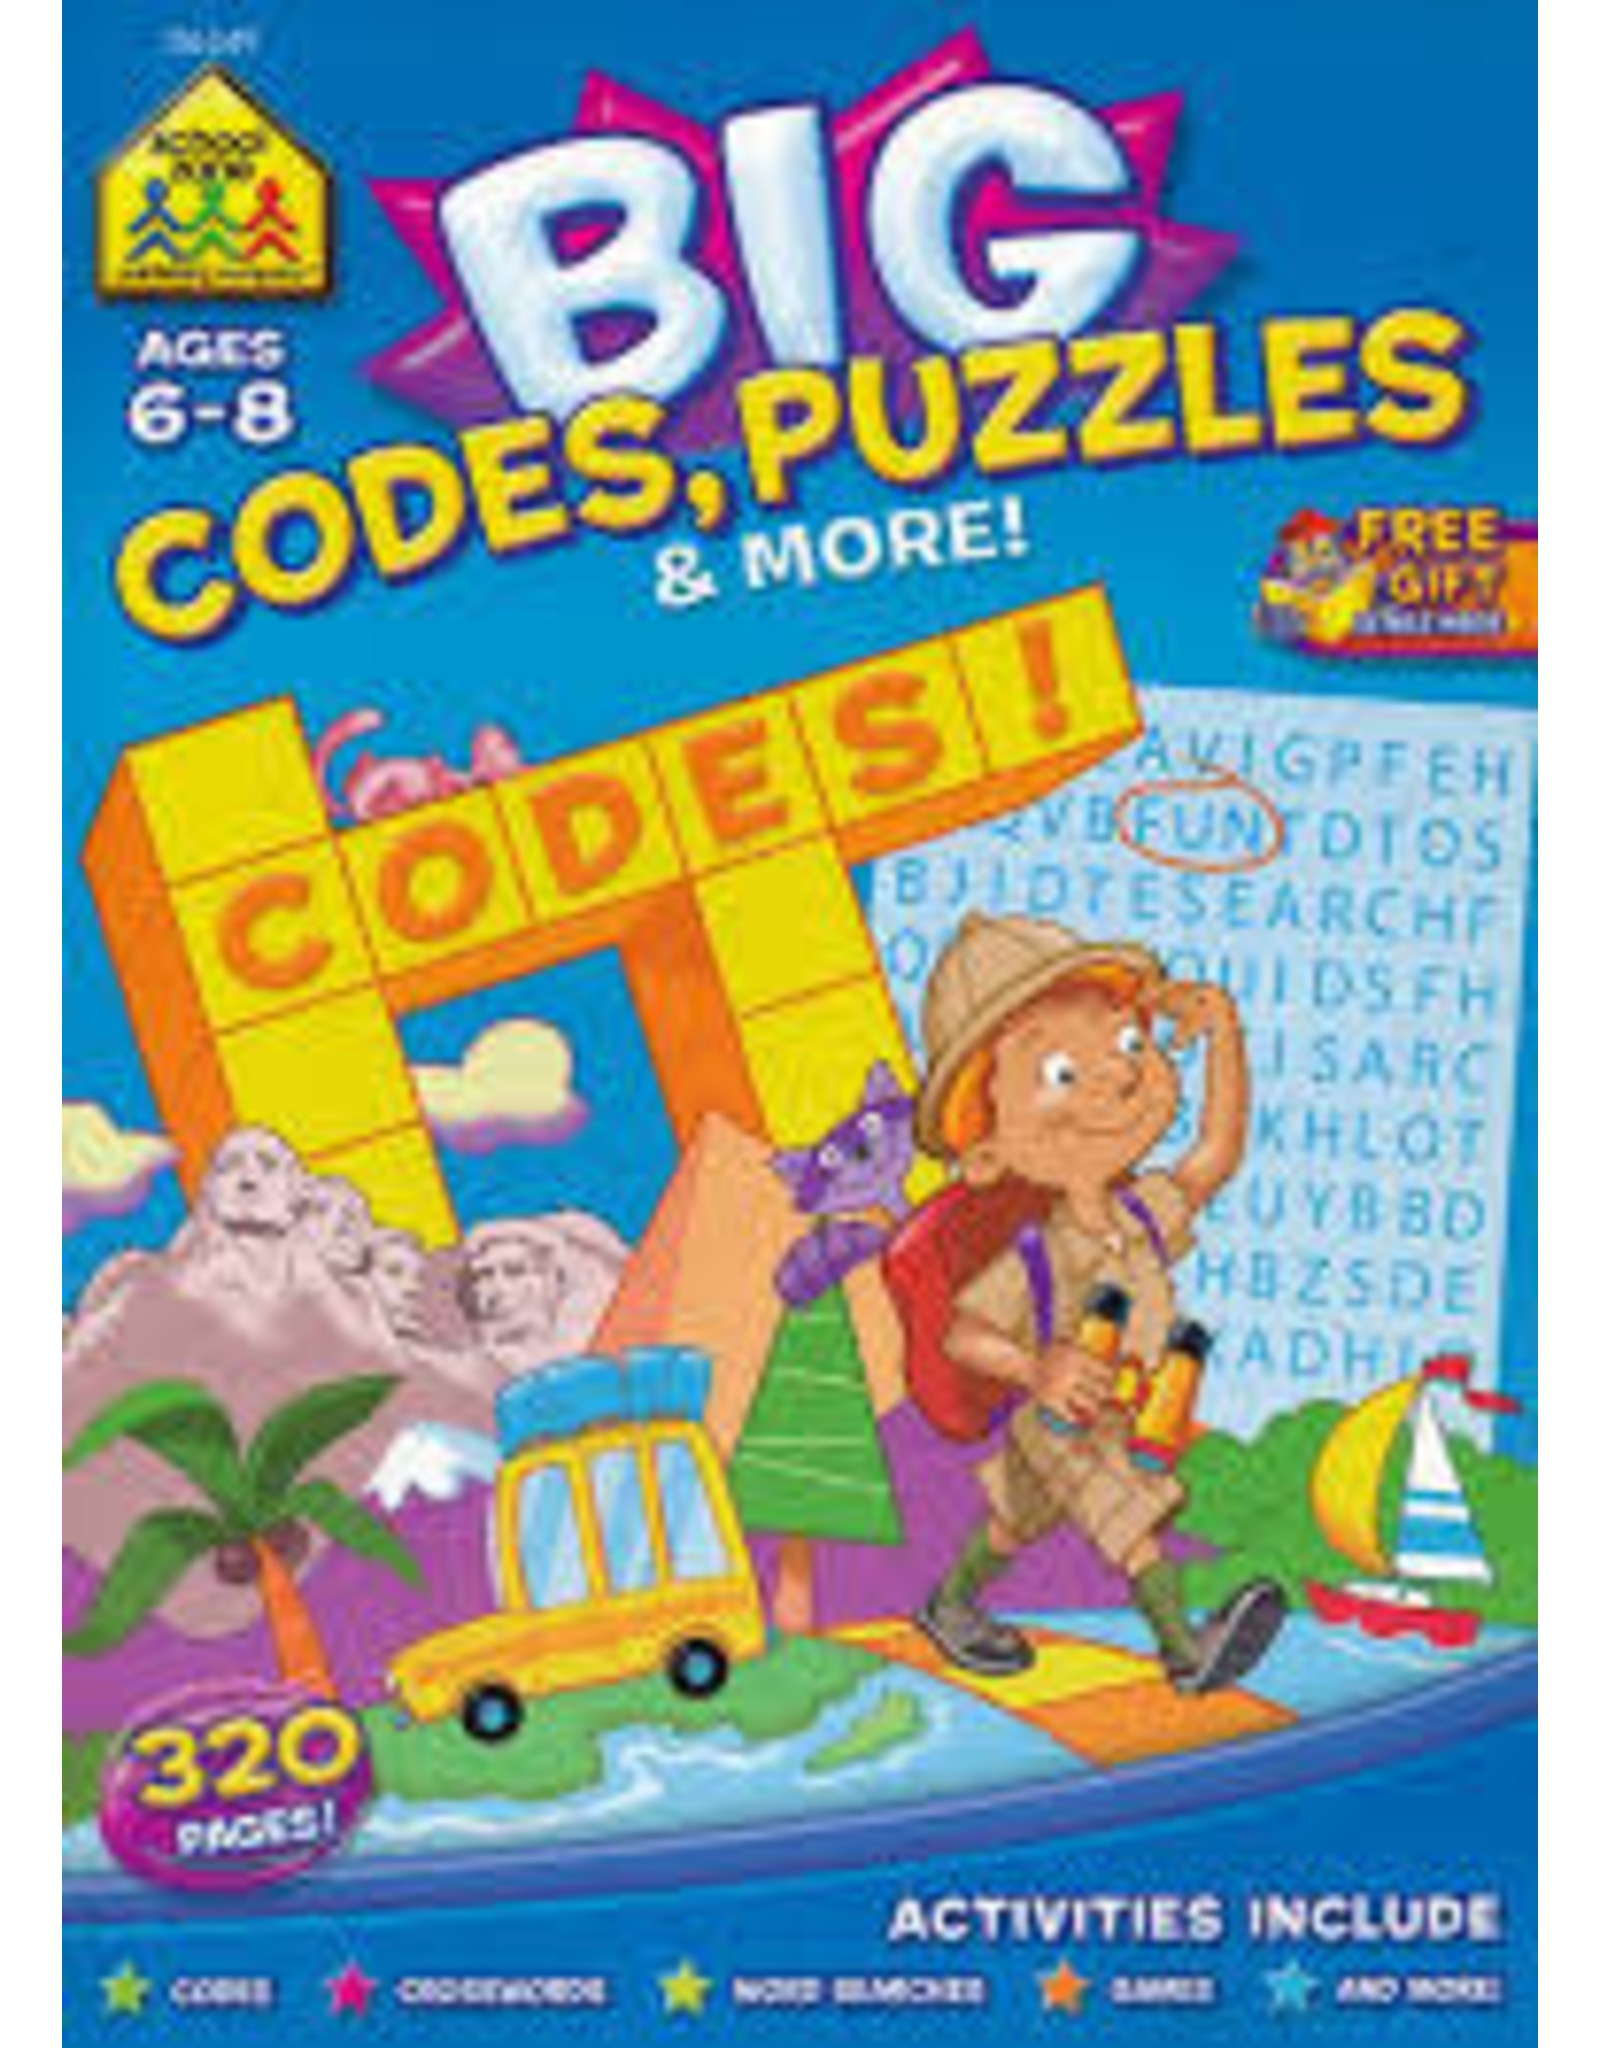 Big Codes, Puzzles, and More